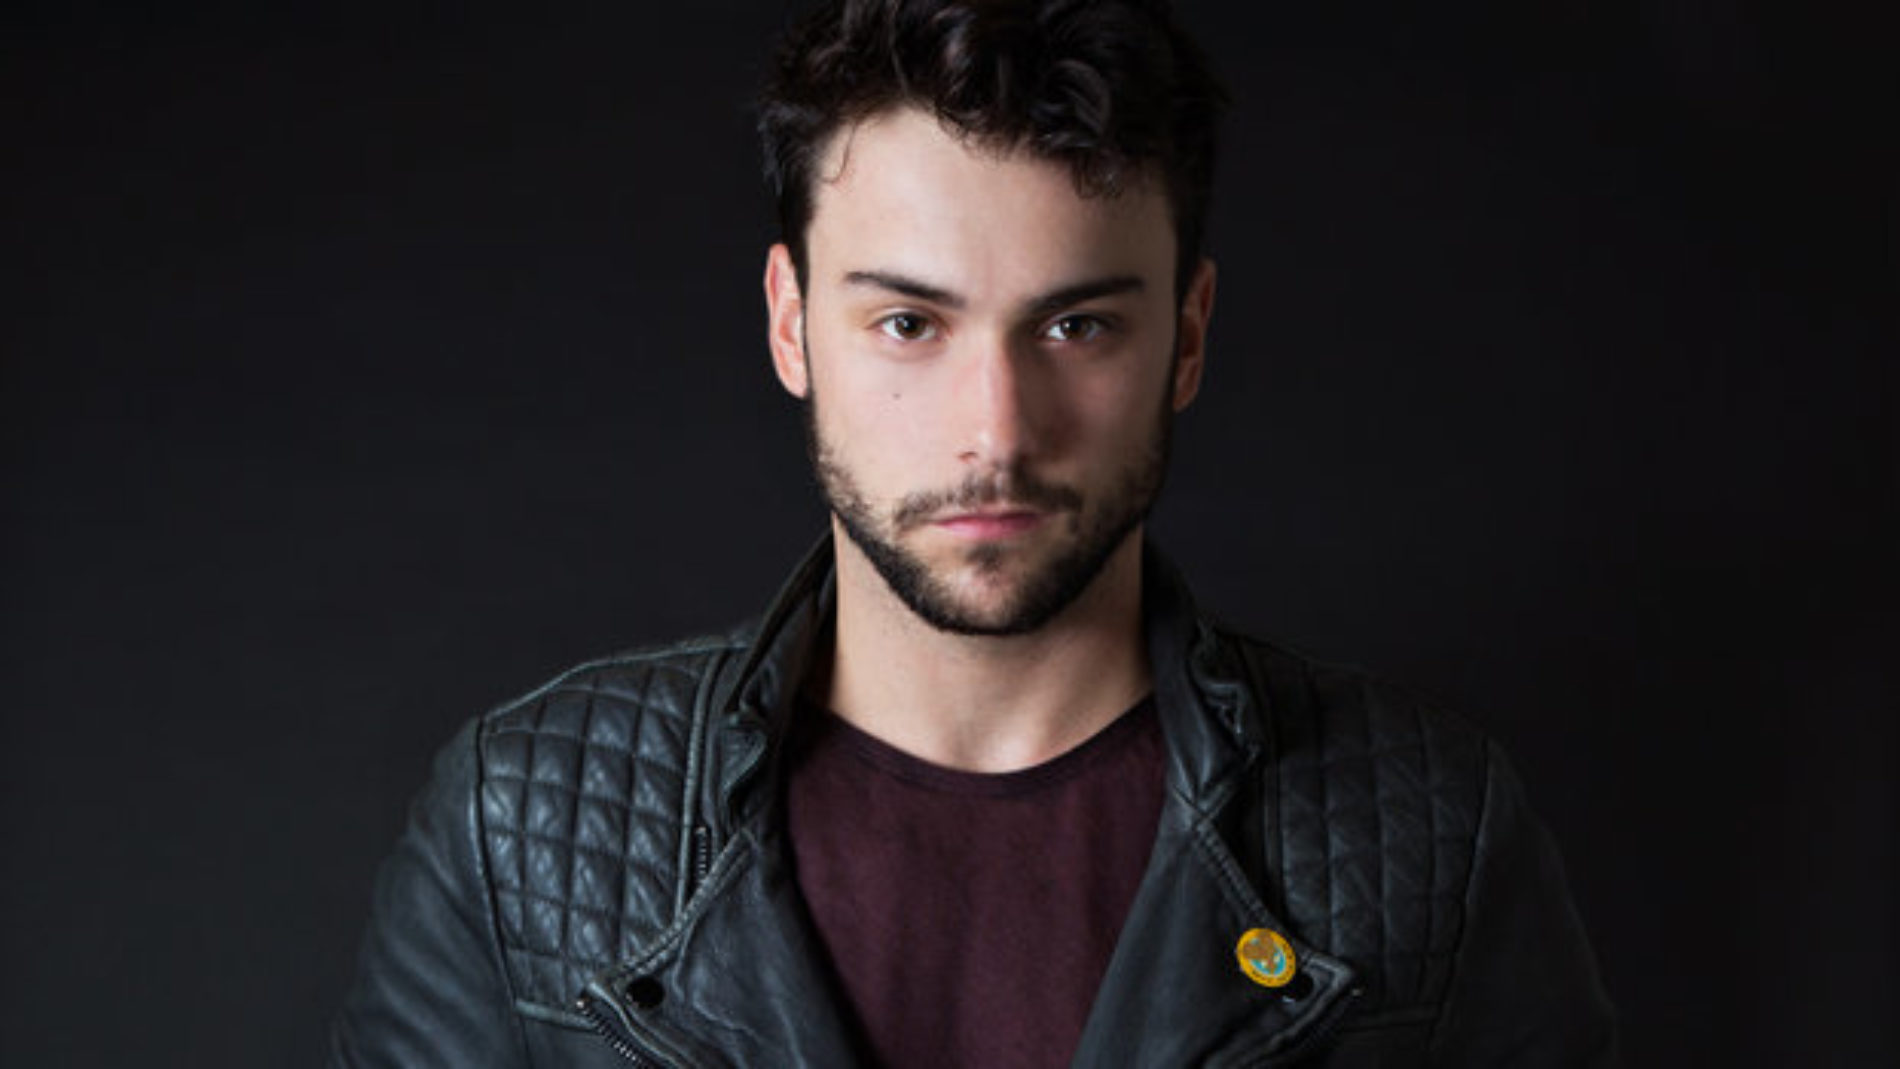 ‘How to Get Away with Murder’ star Jack Falahee talks about sexuality following Trump win